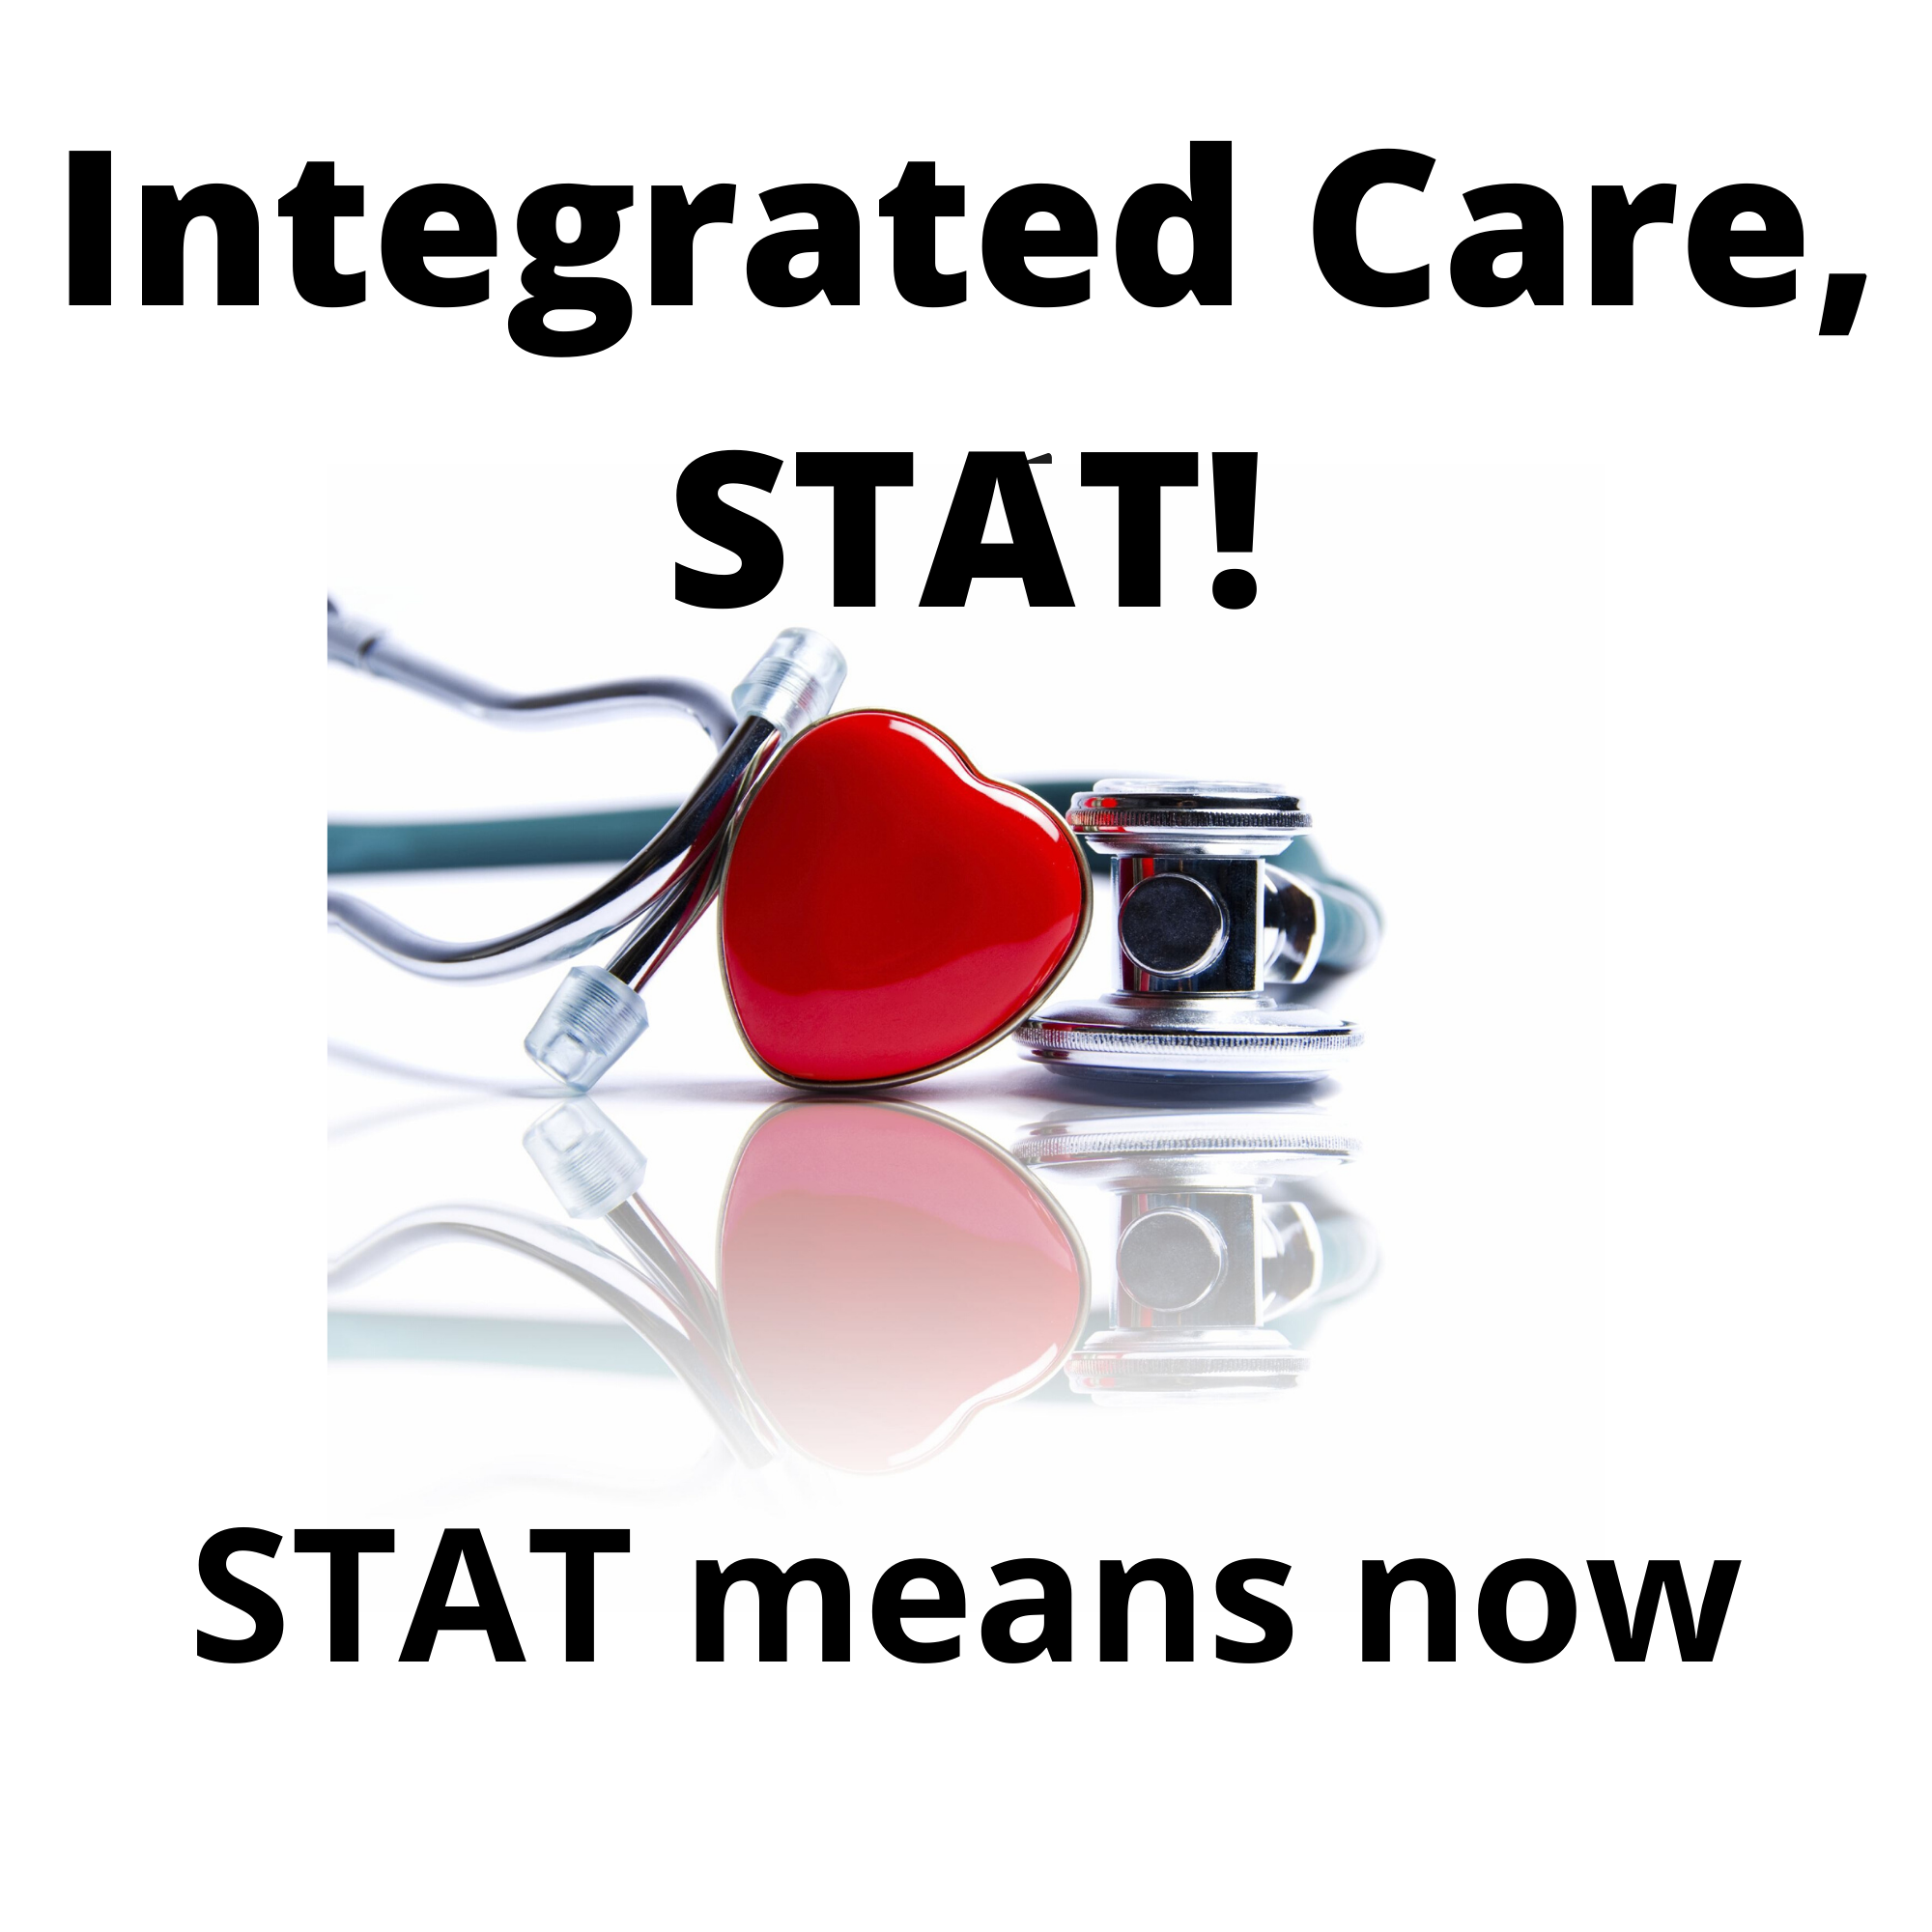 Integrated Care, STAT!